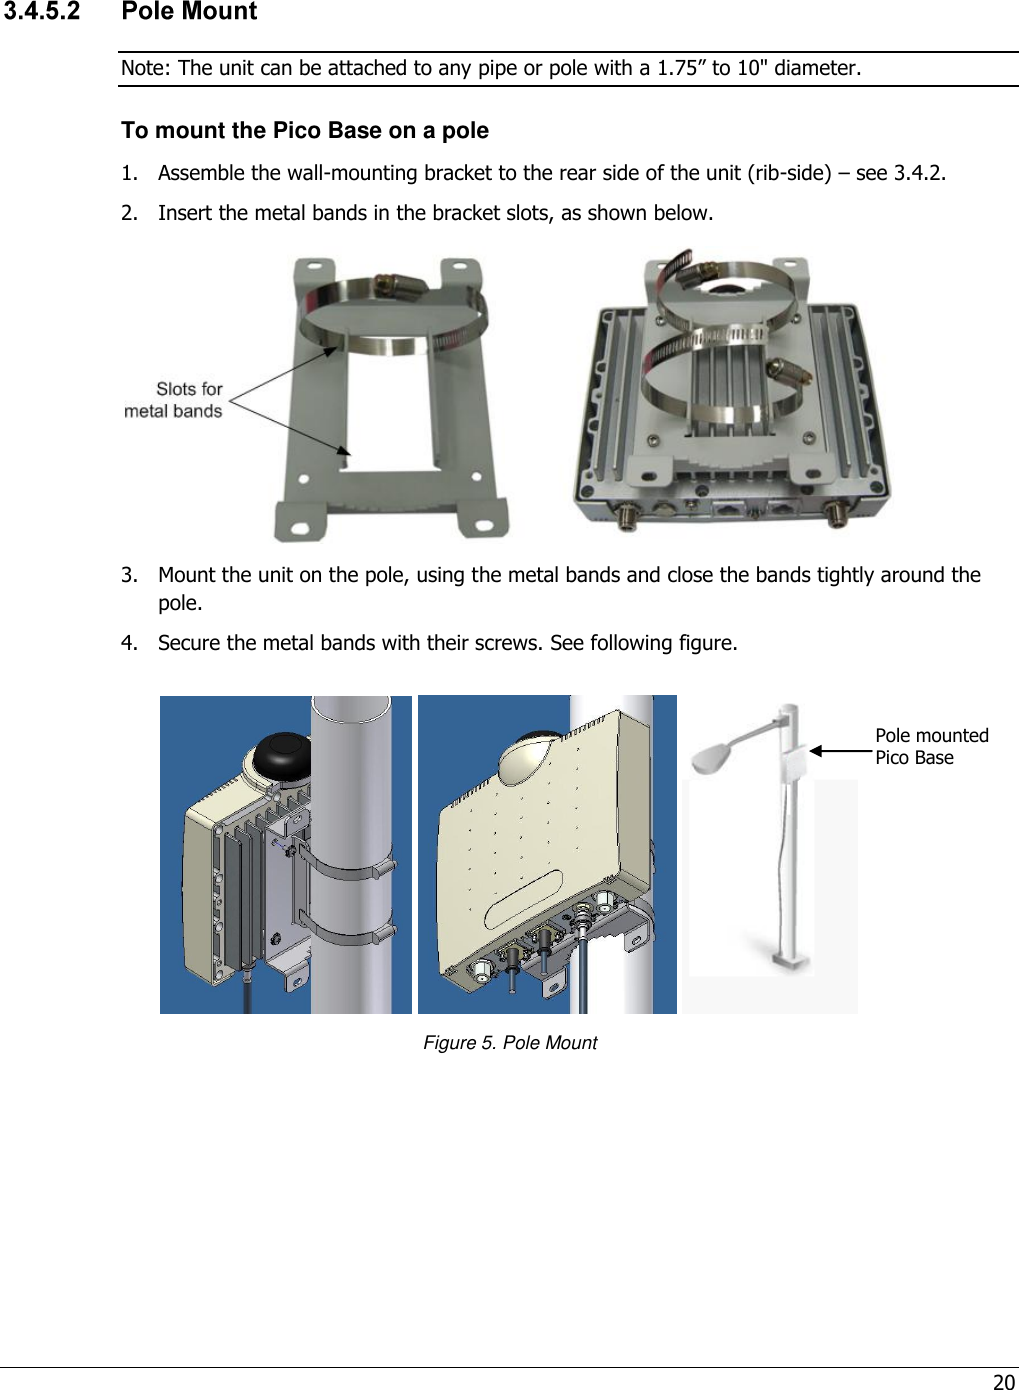 20   Note: The unit can be attached to any pipe or pole with a 1.75” to 10&quot; diameter. To mount the Pico Base on a pole 1.  Assemble the wall-mounting bracket to the rear side of the unit (rib-side) – see 3.4.2. 2.  Insert the metal bands in the bracket slots, as shown below.  3.  Mount the unit on the pole, using the metal bands and close the bands tightly around the pole. 4.  Secure the metal bands with their screws. See following figure.      Figure 5. Pole Mount  Pole mounted Pico Base 